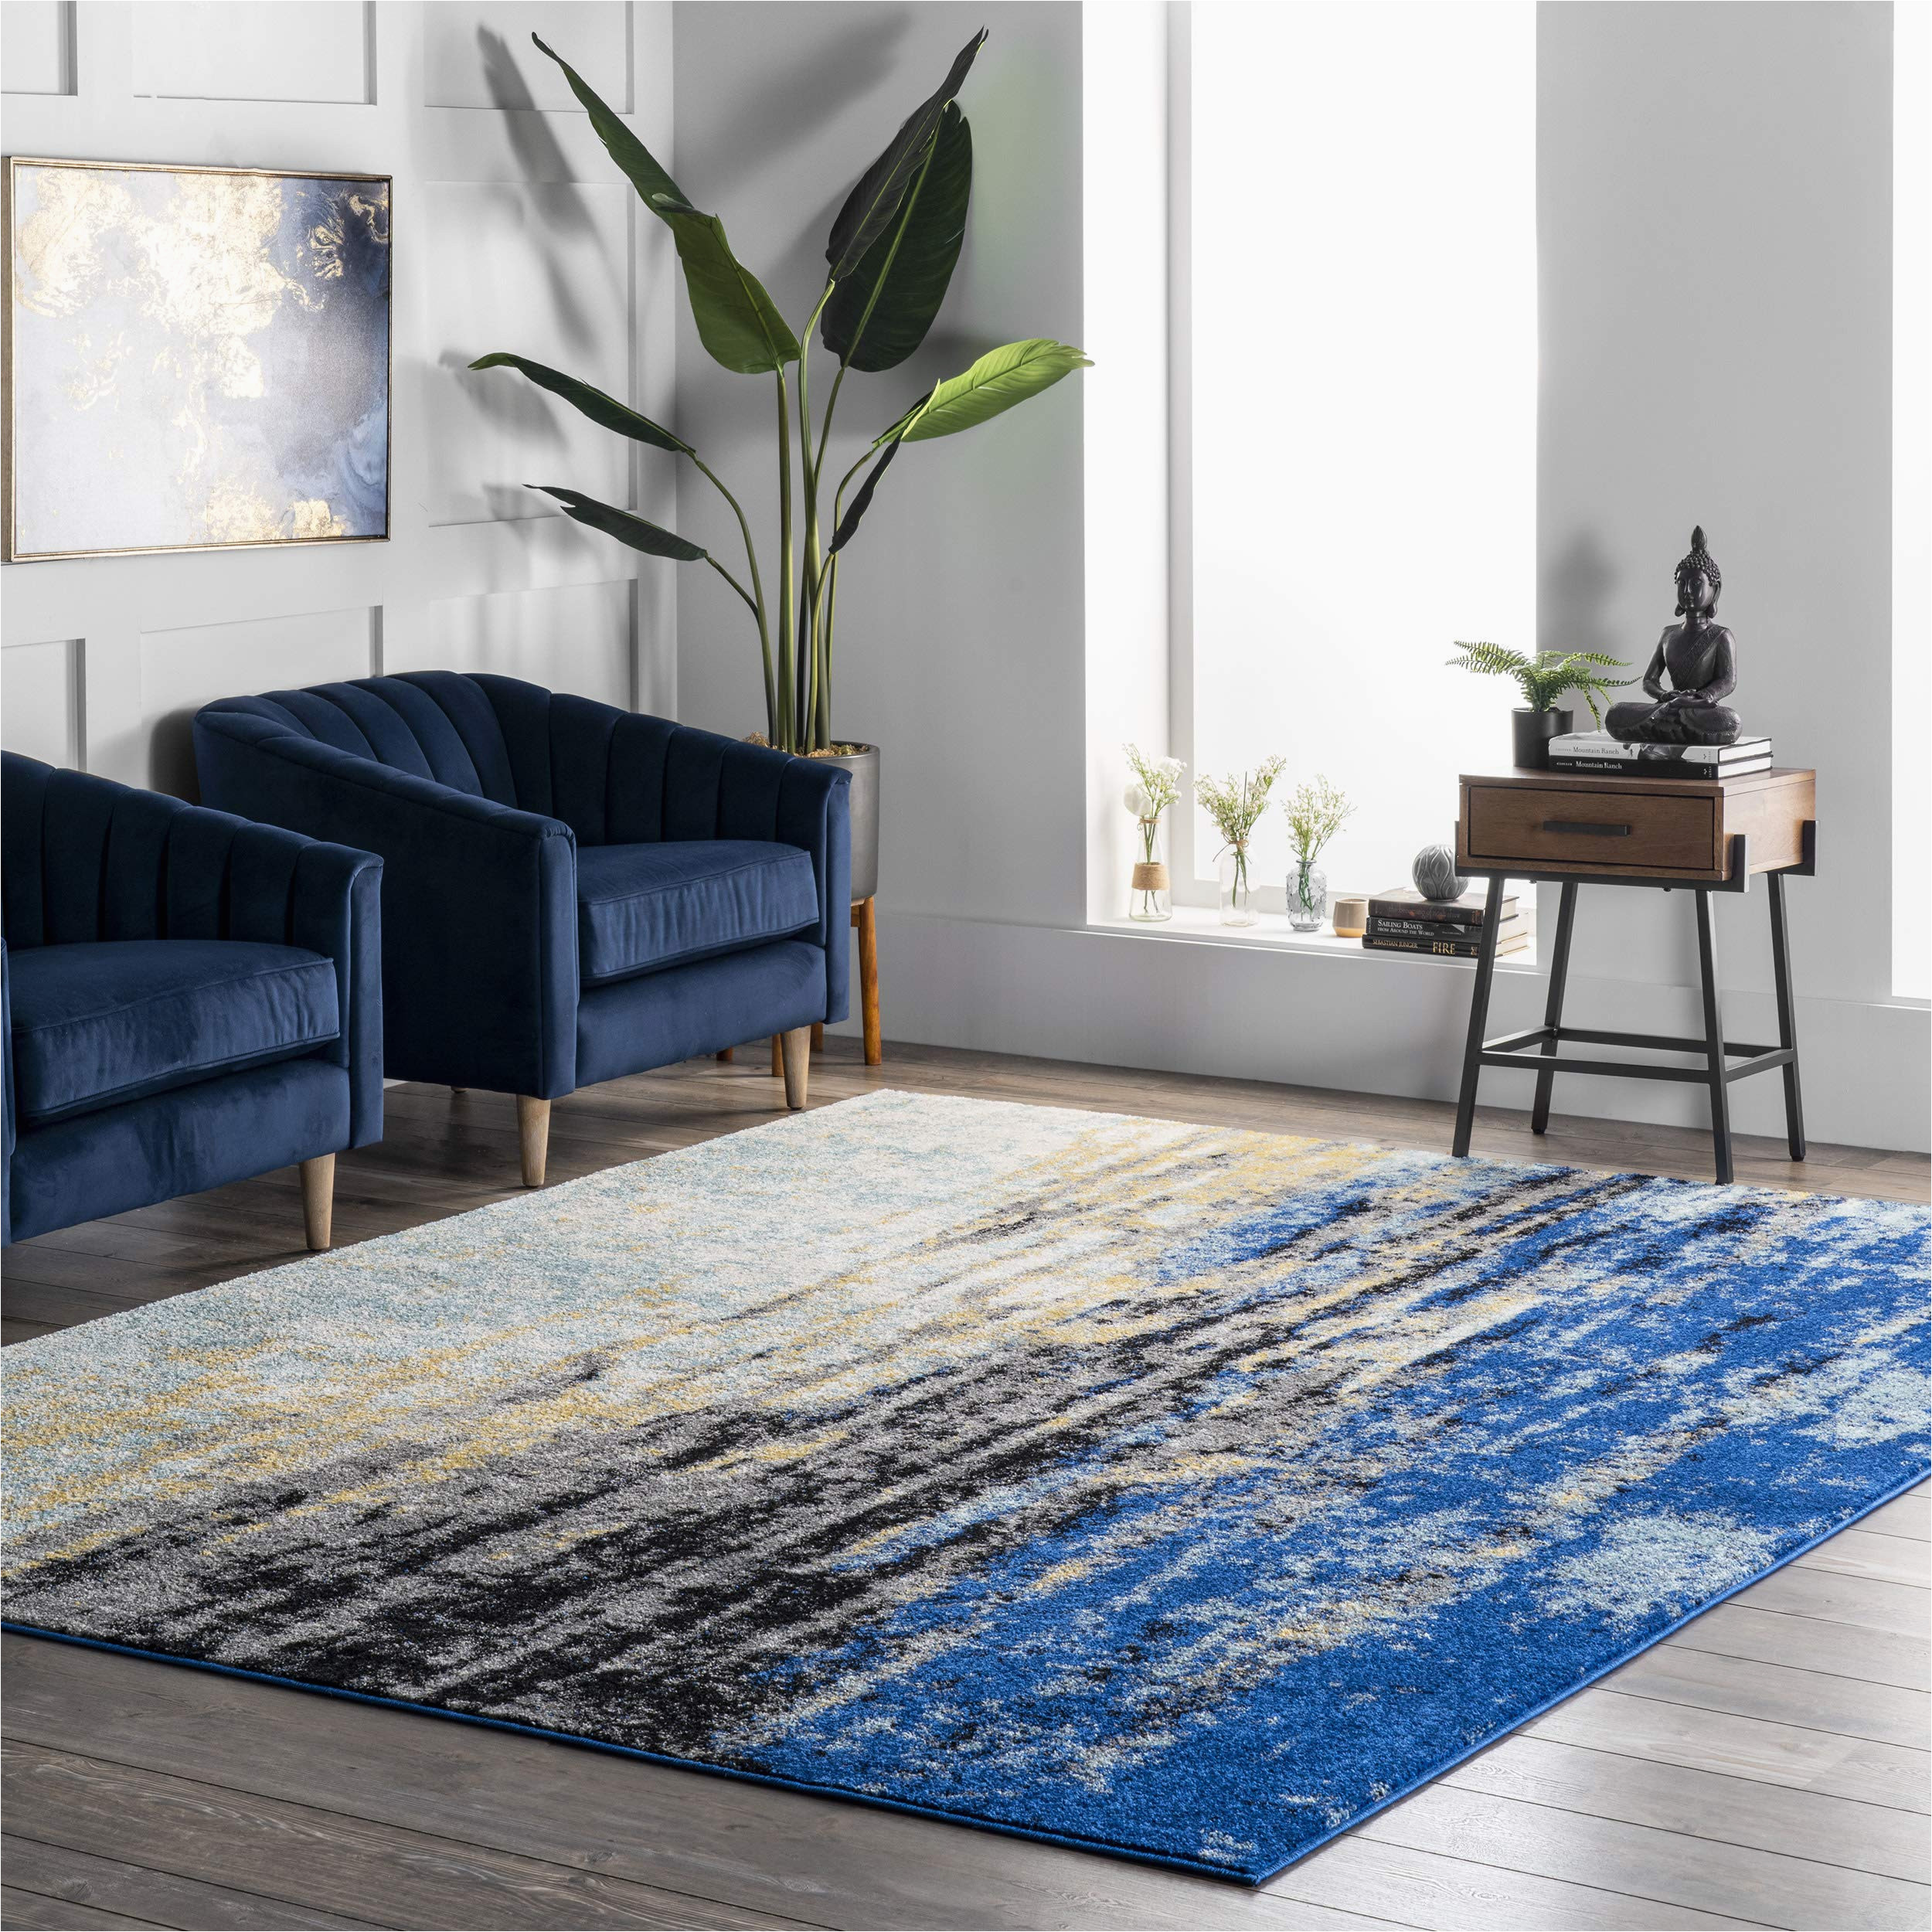 Nuloom Remona Abstract area Rug Nuloom Waterfall Vintage Abstract area Rug, 6′ Square, Blue